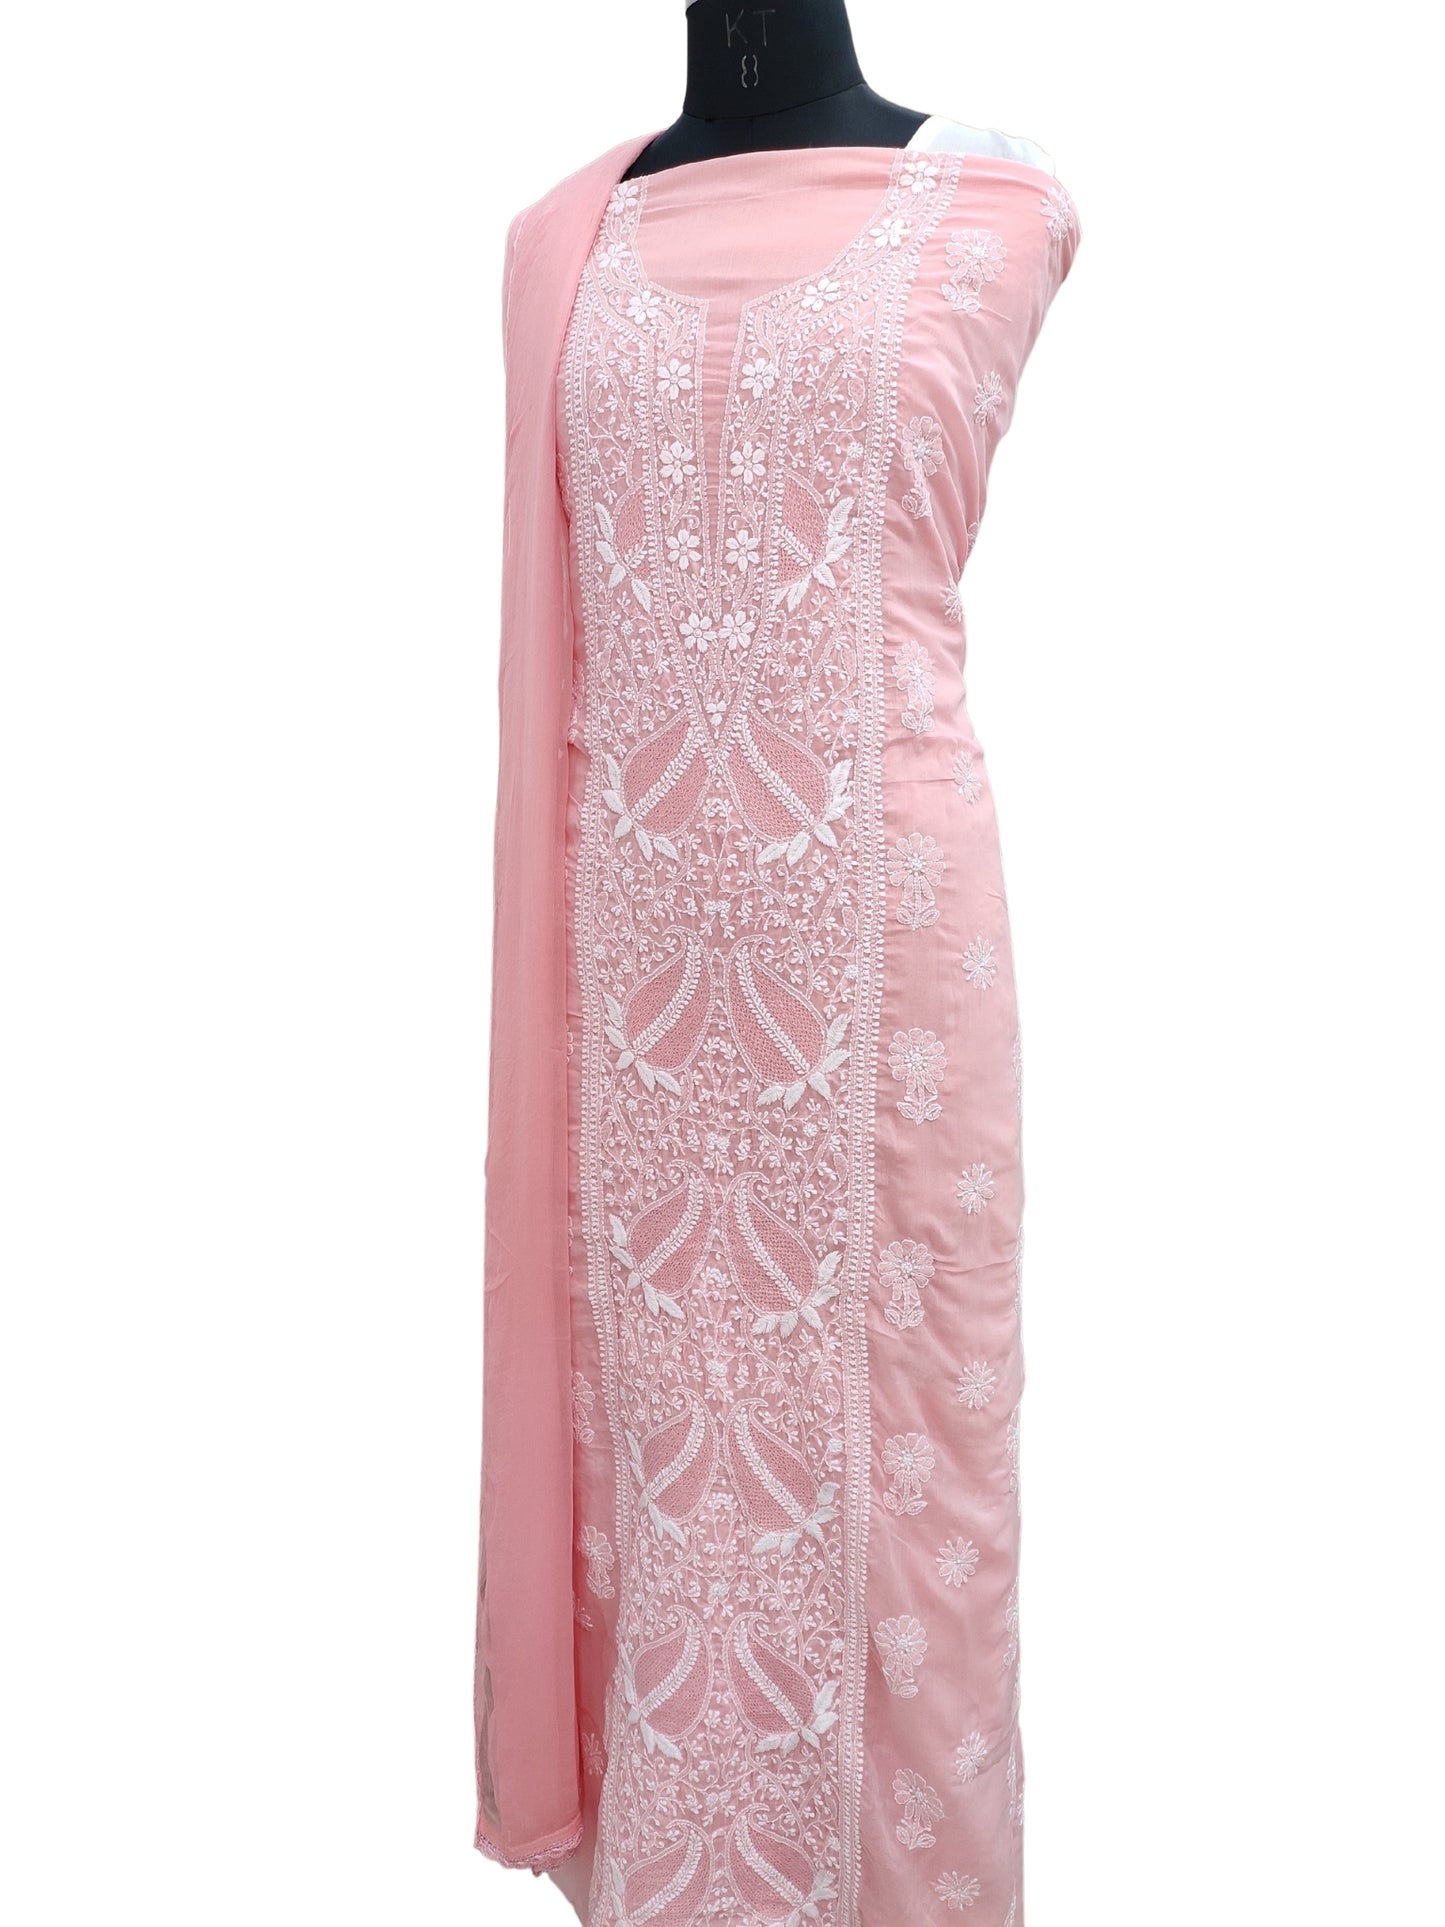 Shyamal Chikan Hand Embroidered Peach Cotton Lucknowi Chikankari Unstitched Suit Piece With Jaali Work- S22214